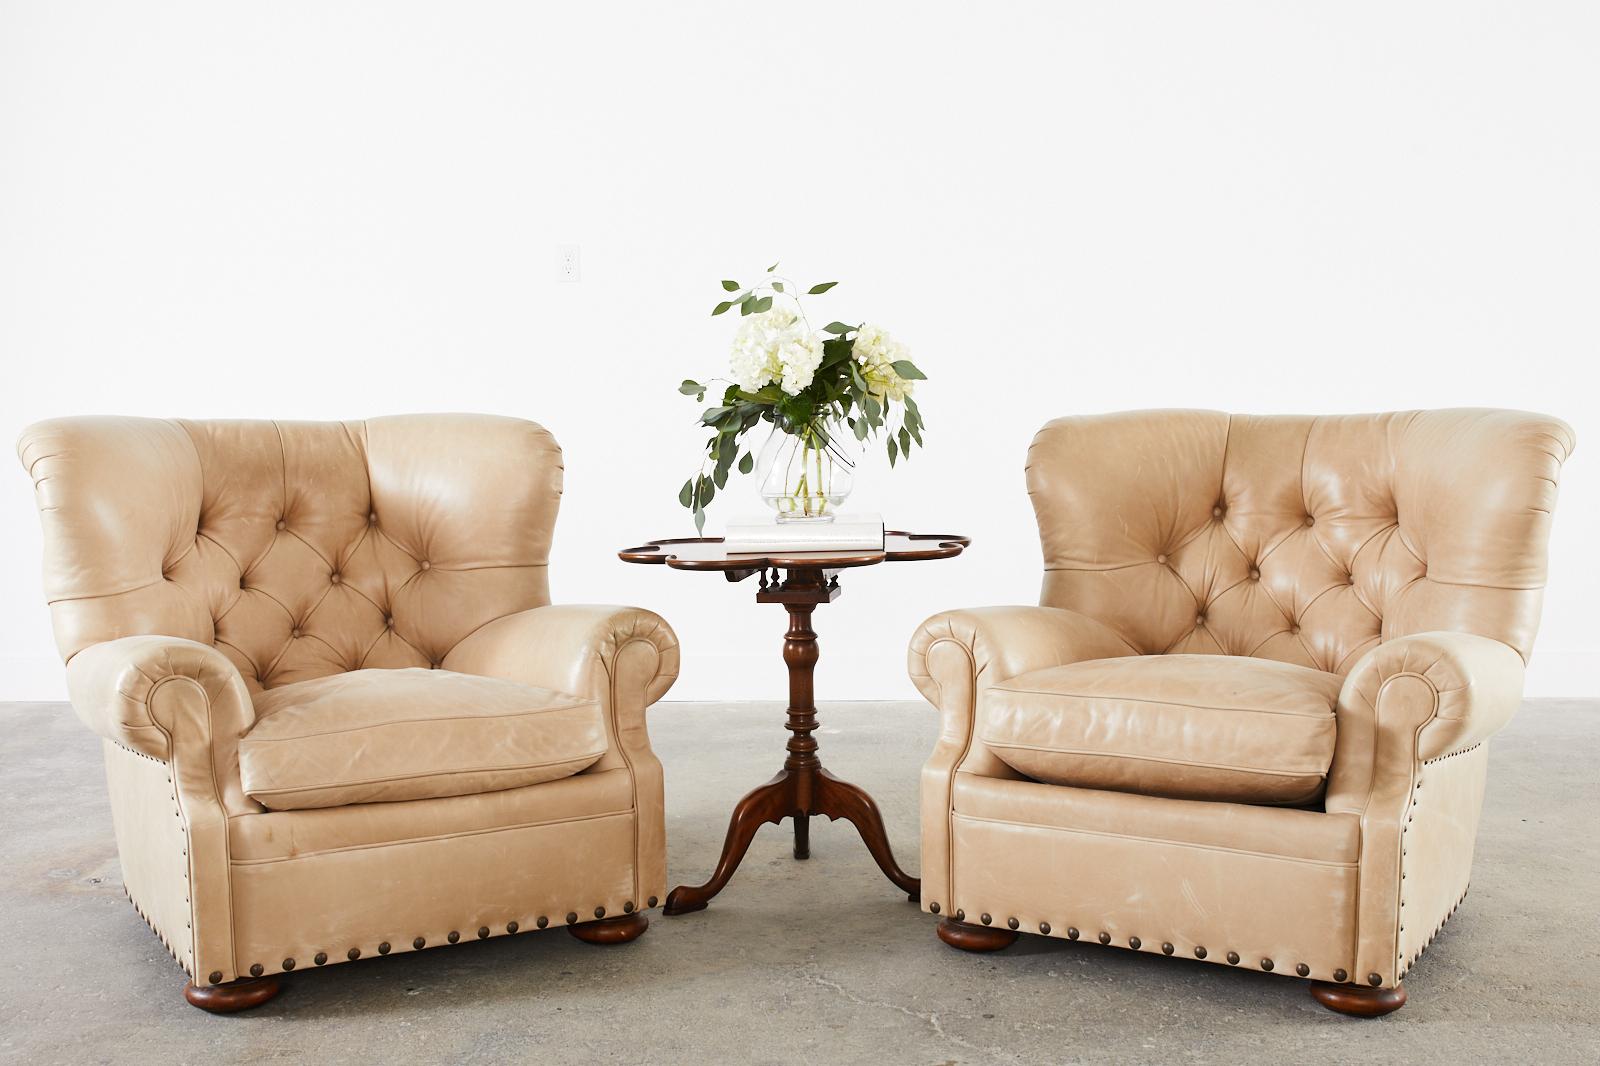 Fabulous bespoke pair of tufted leather wingback club, lounge, or armchairs by Ralph Lauren. The armchairs feature a hardwood frame covered in a custom warm light beige sand toned leather accented with large patinized brass tack nail heads. The deep